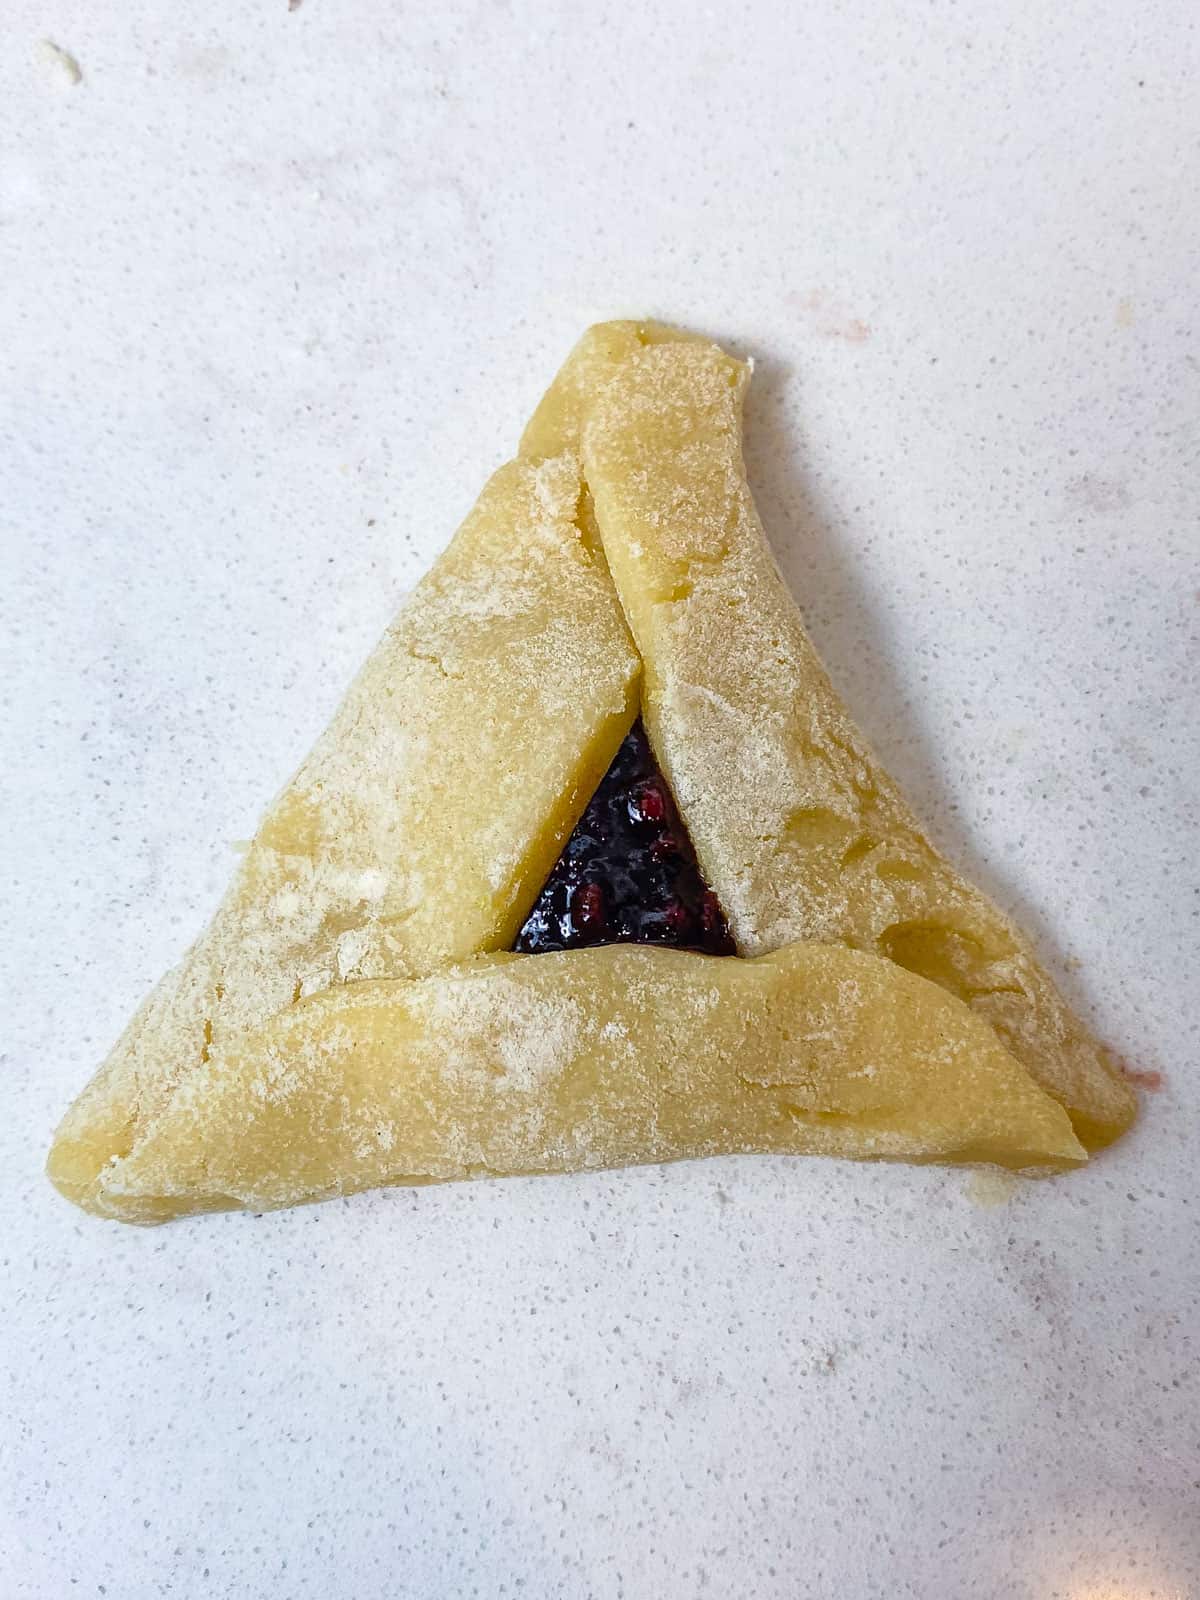 Fold the last side of the dough up, forming a hamantaschen cookies and gently pinch the corners to seal.